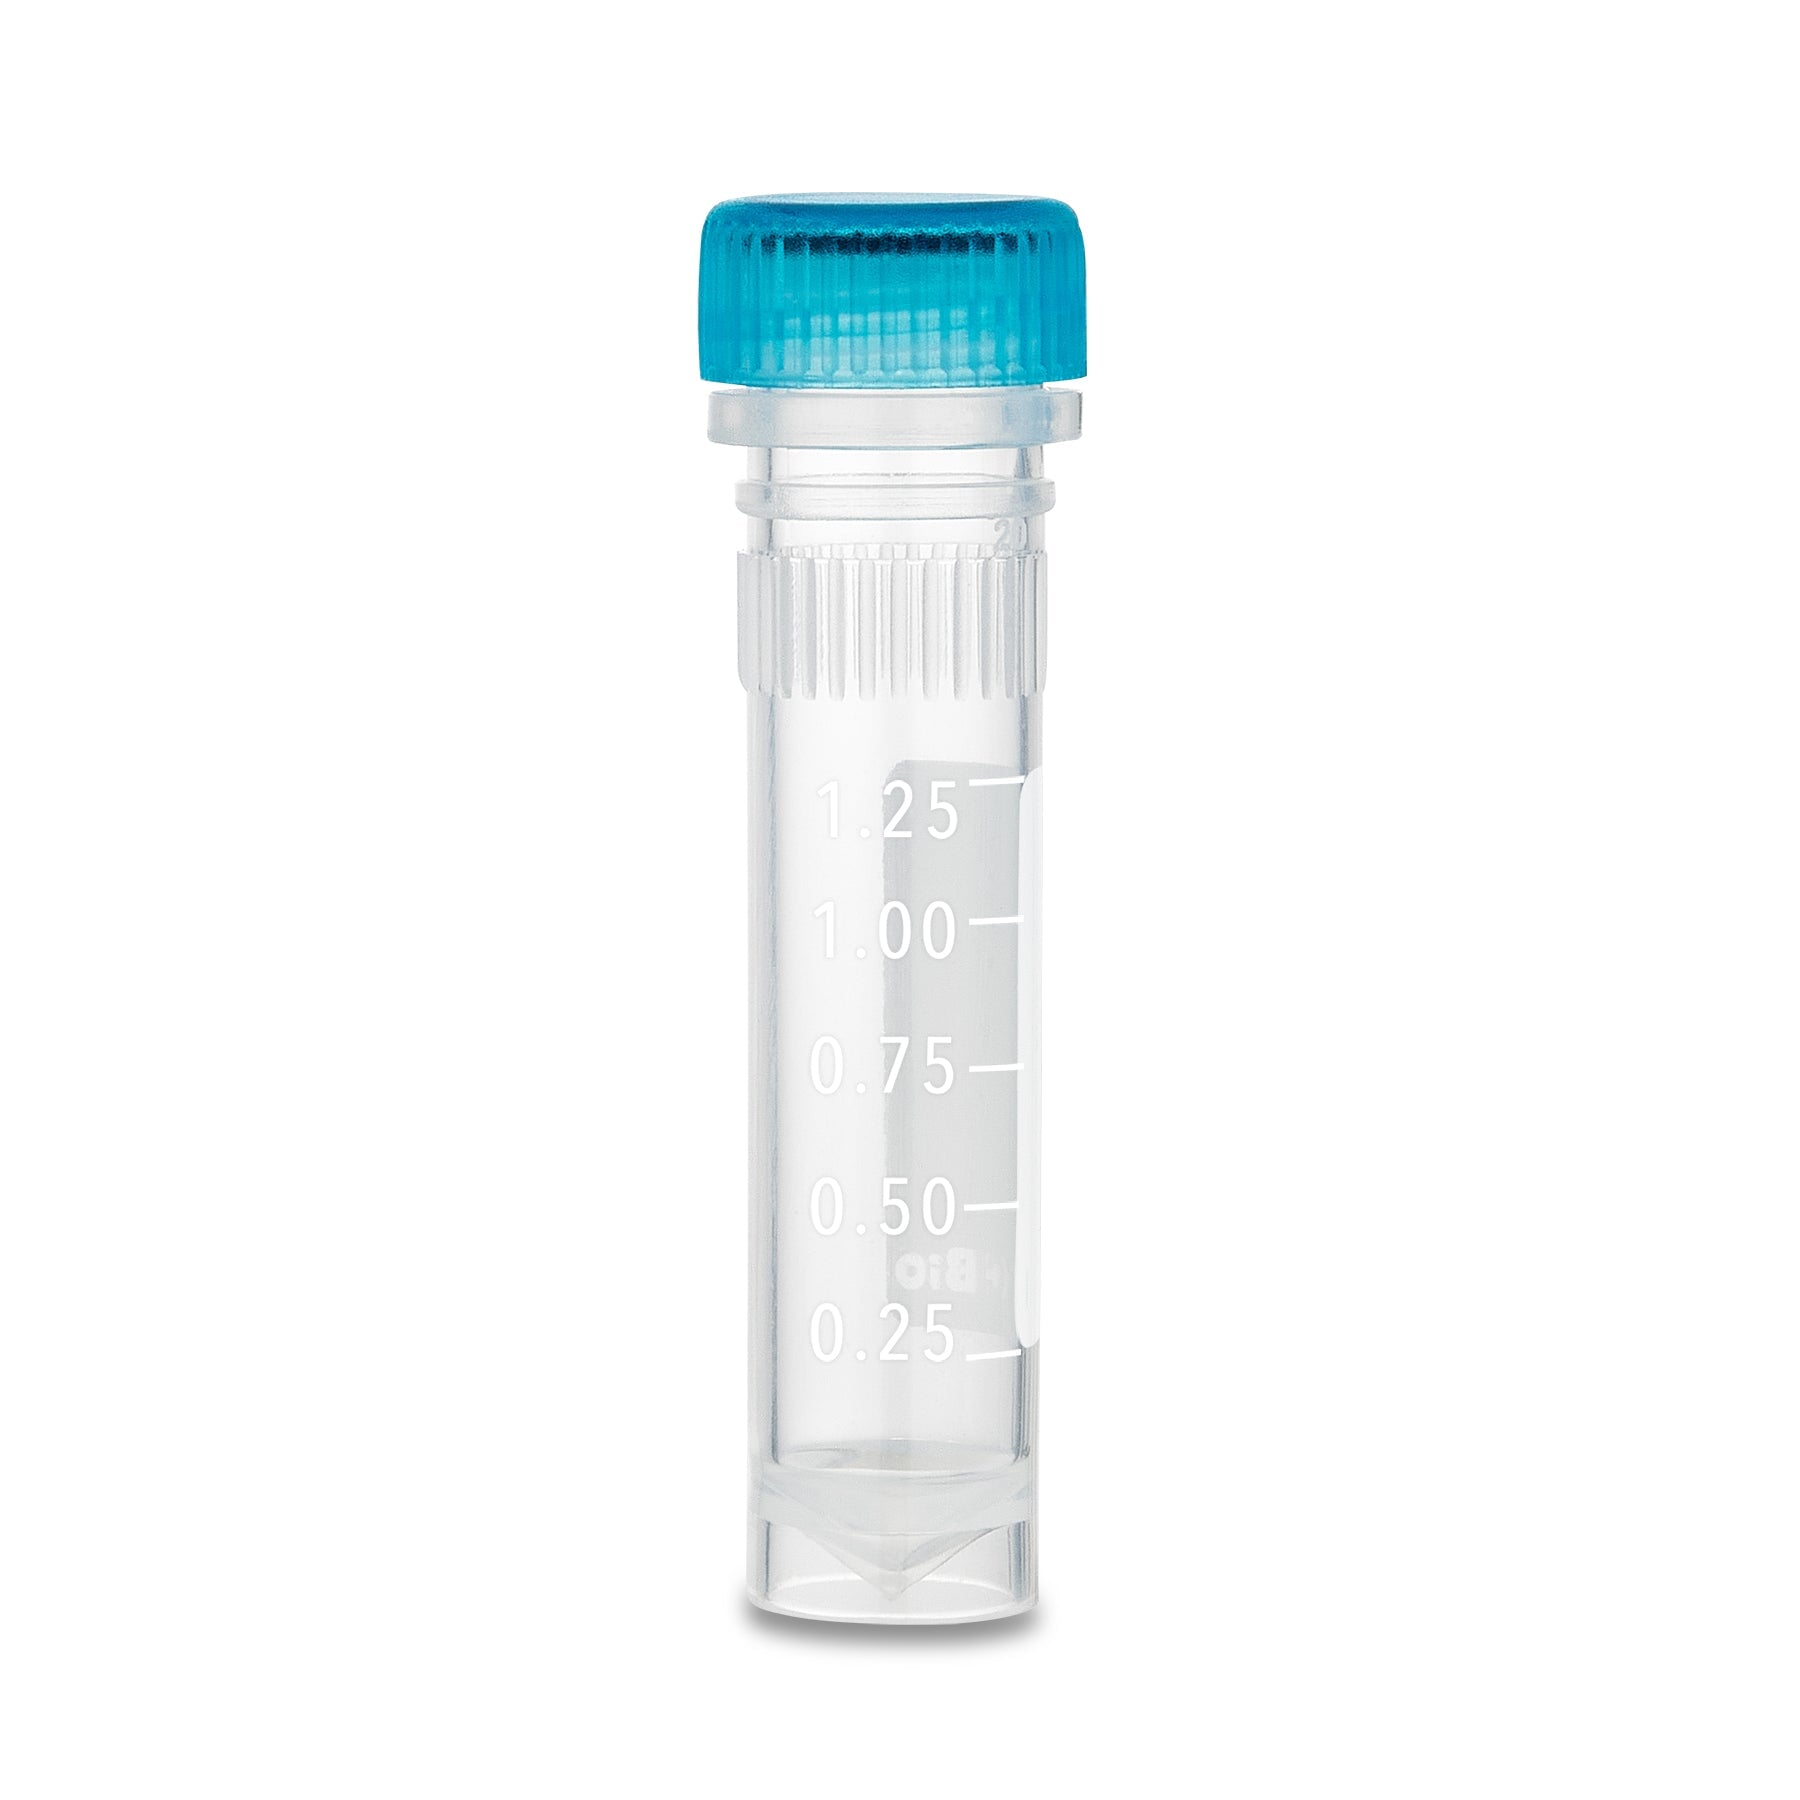 MTC Bio C3220-SG ClearSeal 2.0mL (13.1 x 46.8mm), sterile, w/ O-ring & attached caps, printed graduations, self-standing, 1000/cs